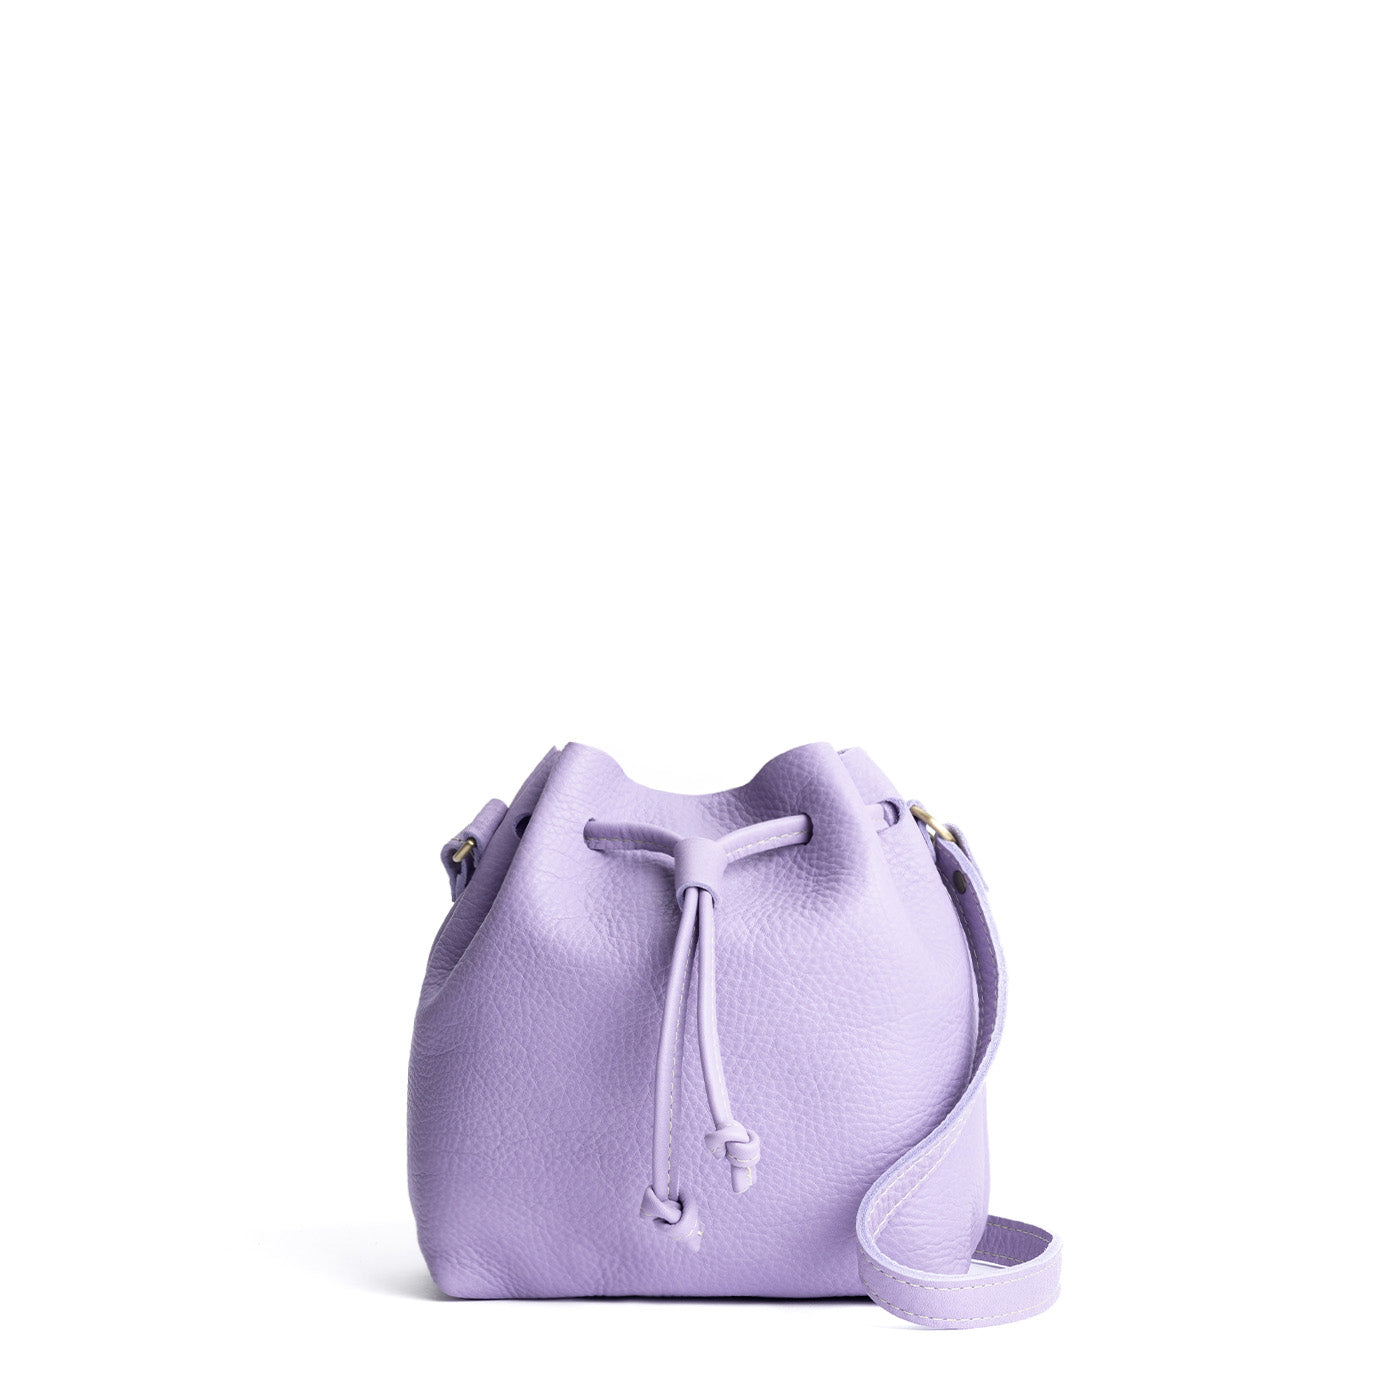 Wisteria*Small | Slouchy crossbody bag with drawstring closure